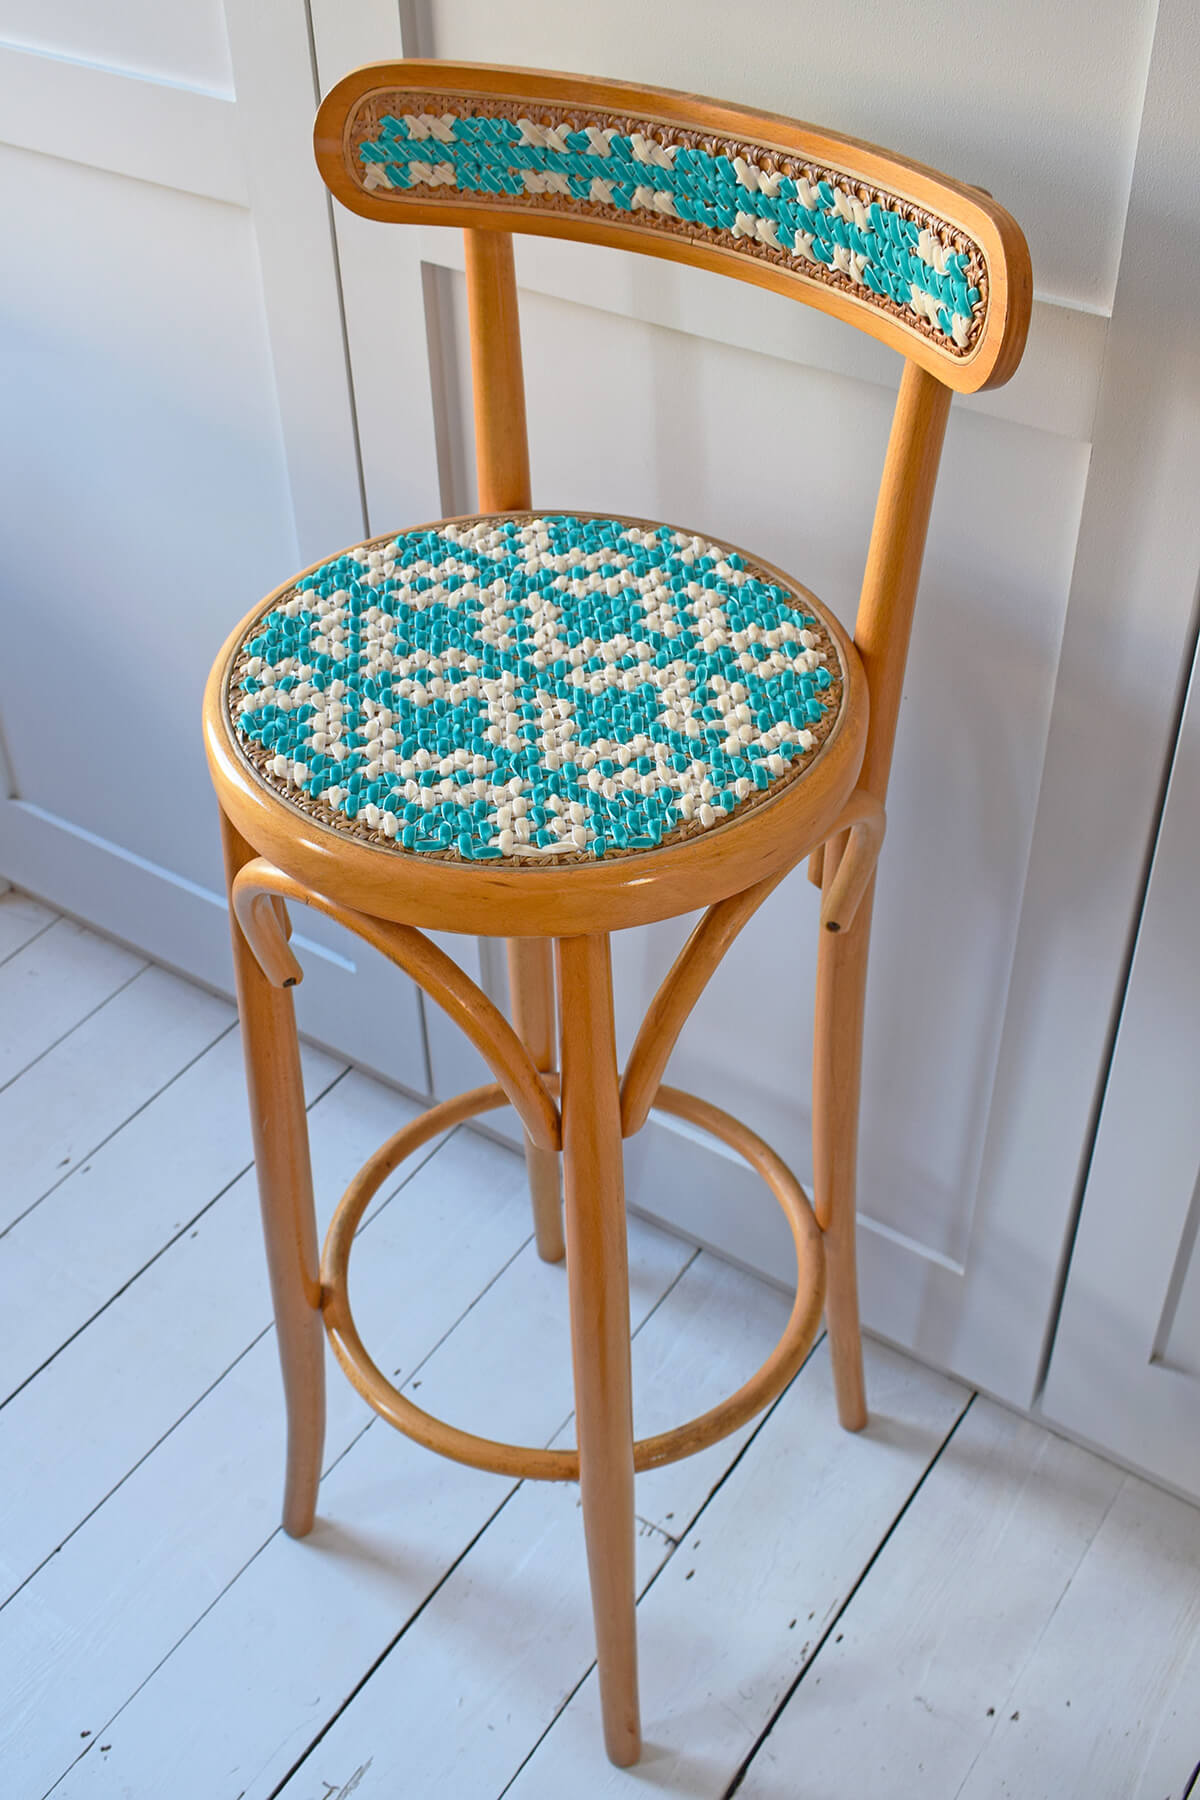 How to cross stitch a chair base